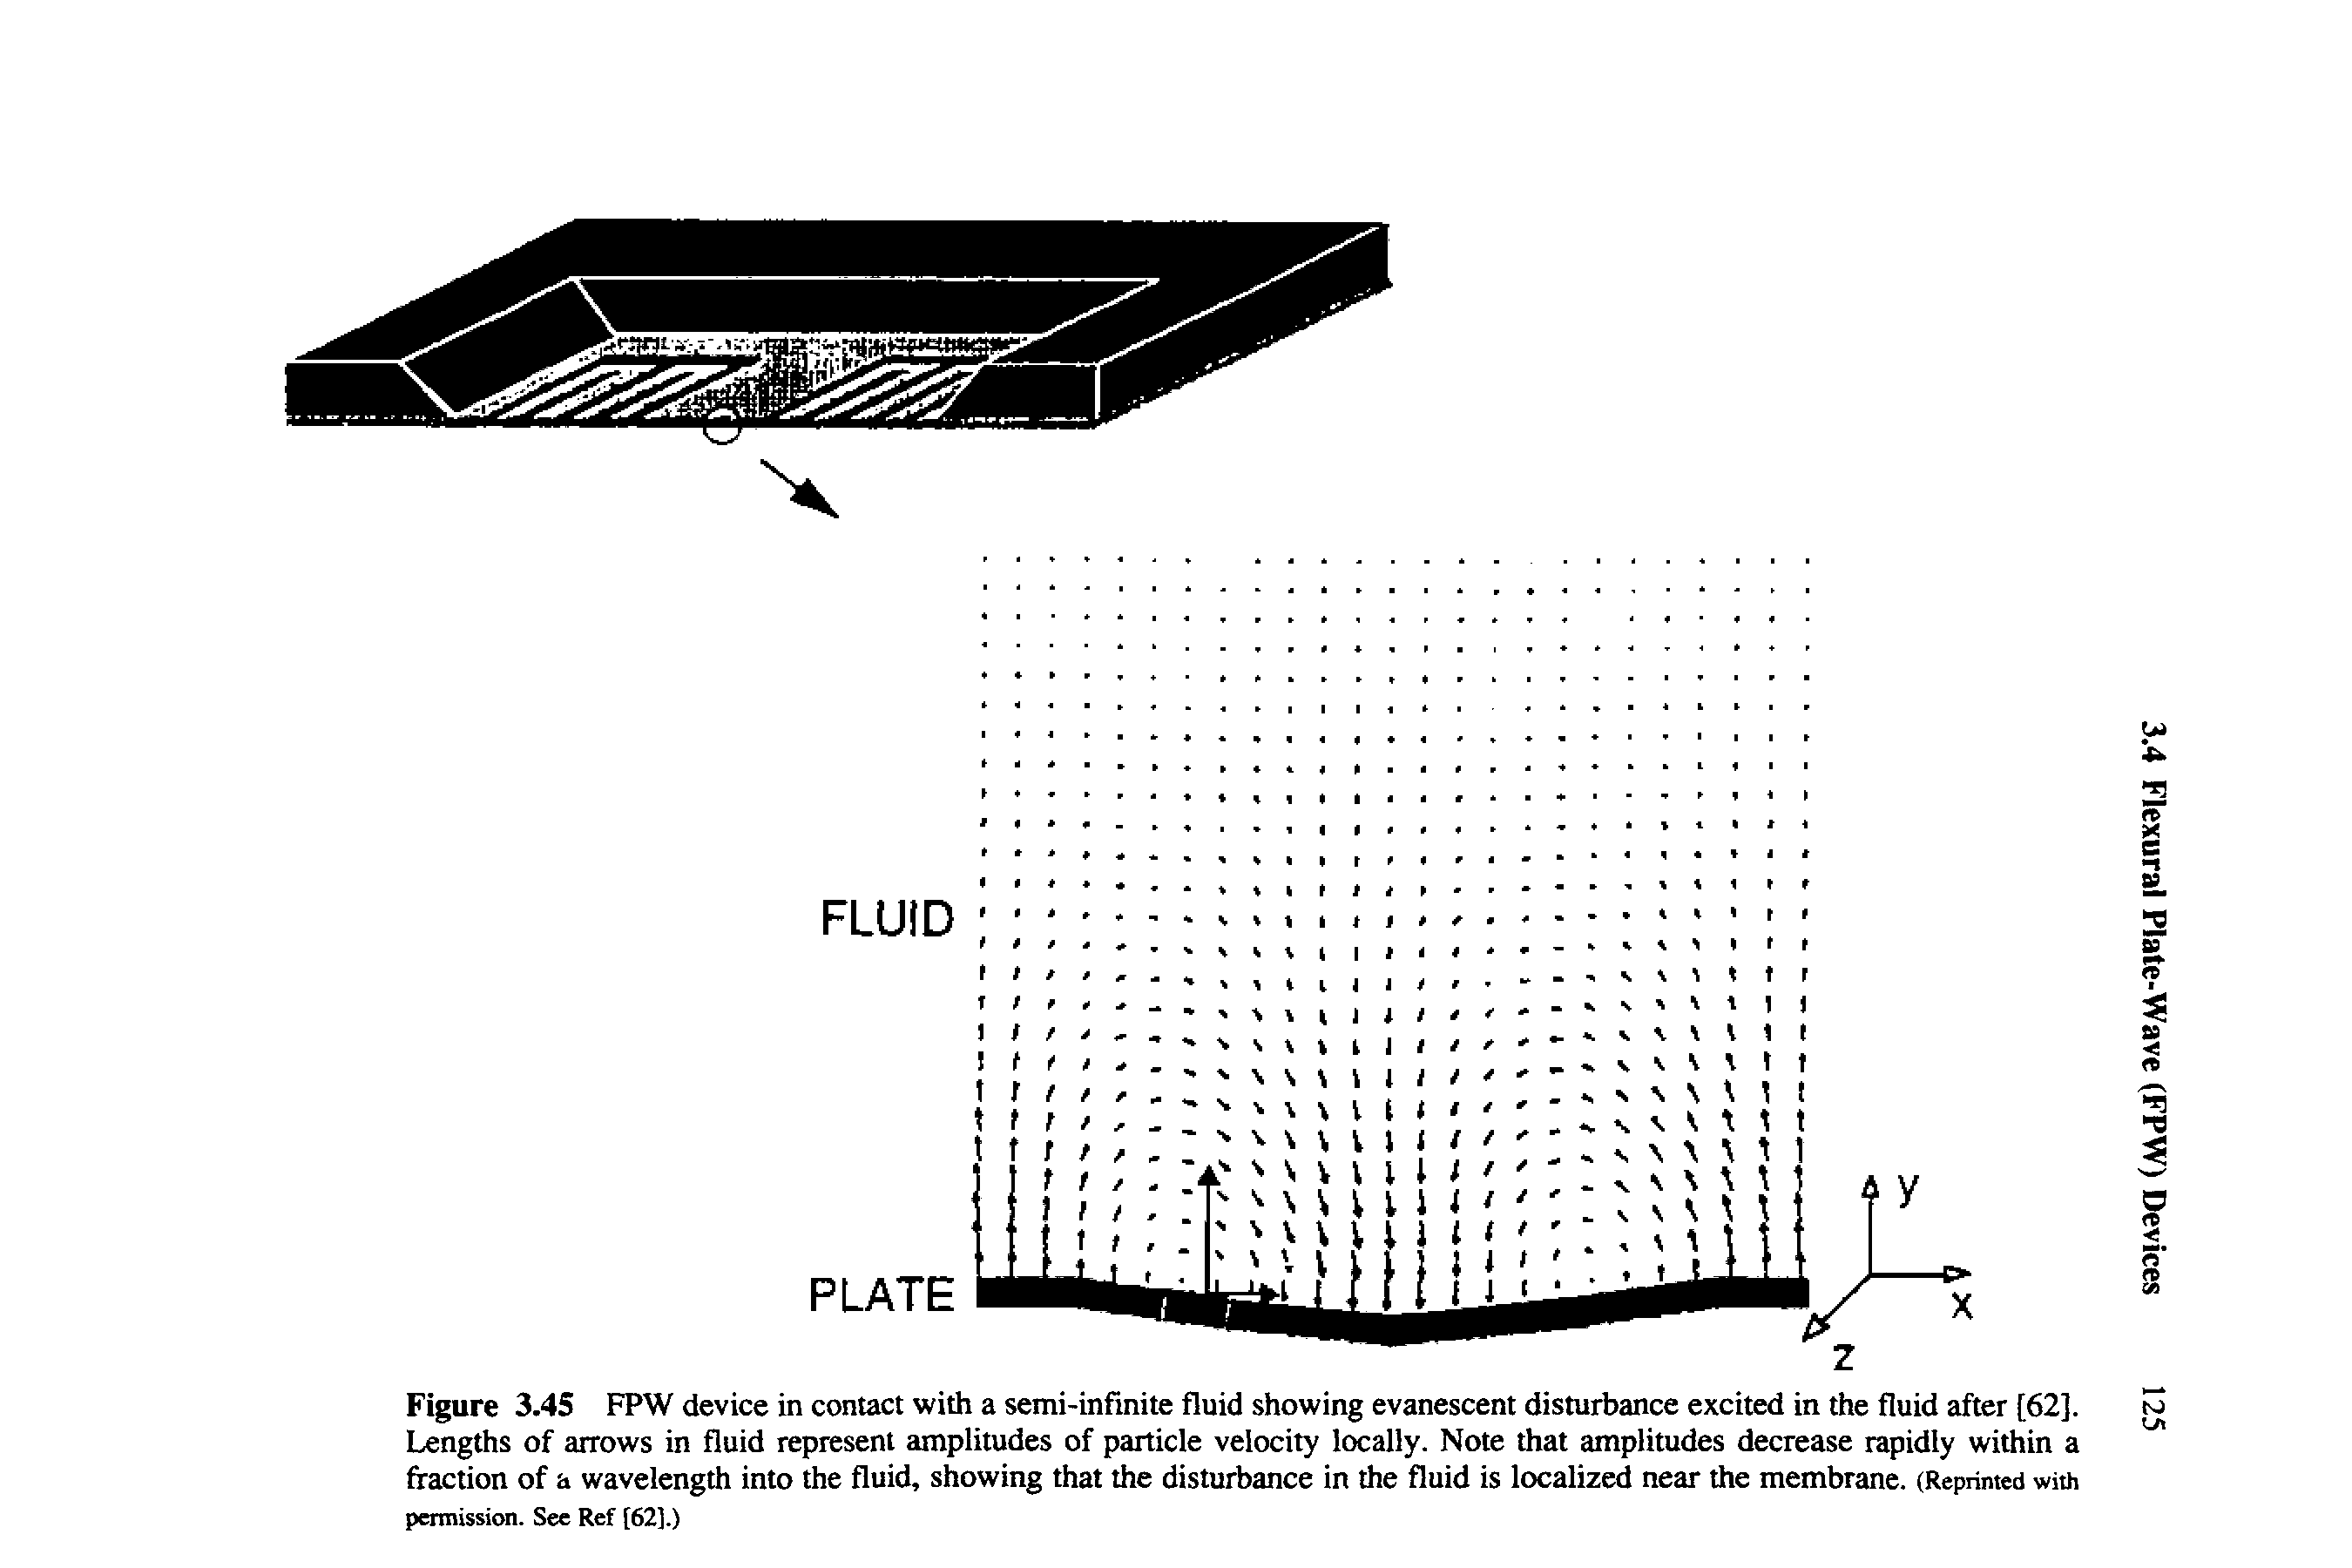 Figure 3.45 FPW device in contact with a semi-infinite fluid showing evanescent disturbance excited in the fluid after [62], Lengths of arrows in fluid represent amplitudes of particle velocity locally. Note that amplitudes decrease rapidly within a fraction of a wavelength into the fluid, showing that the disturbance in the fluid is localized near the membrane. (Reprinted with pennlssion. See Ref [62].)...